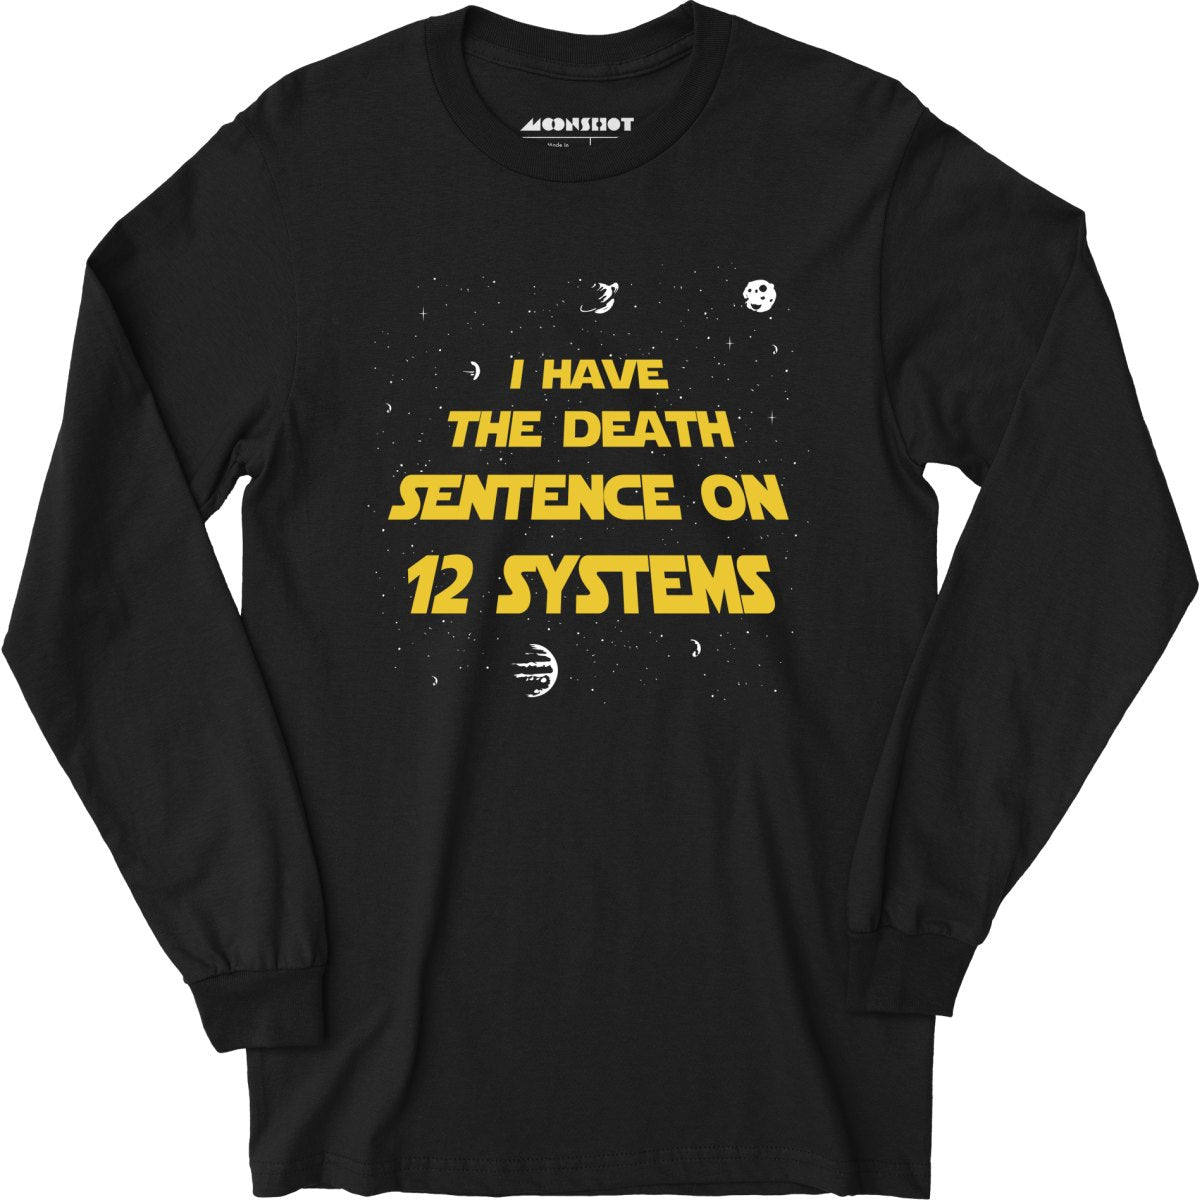 I Have the Death Sentence on 12 Systems v2 - Long Sleeve T-Shirt